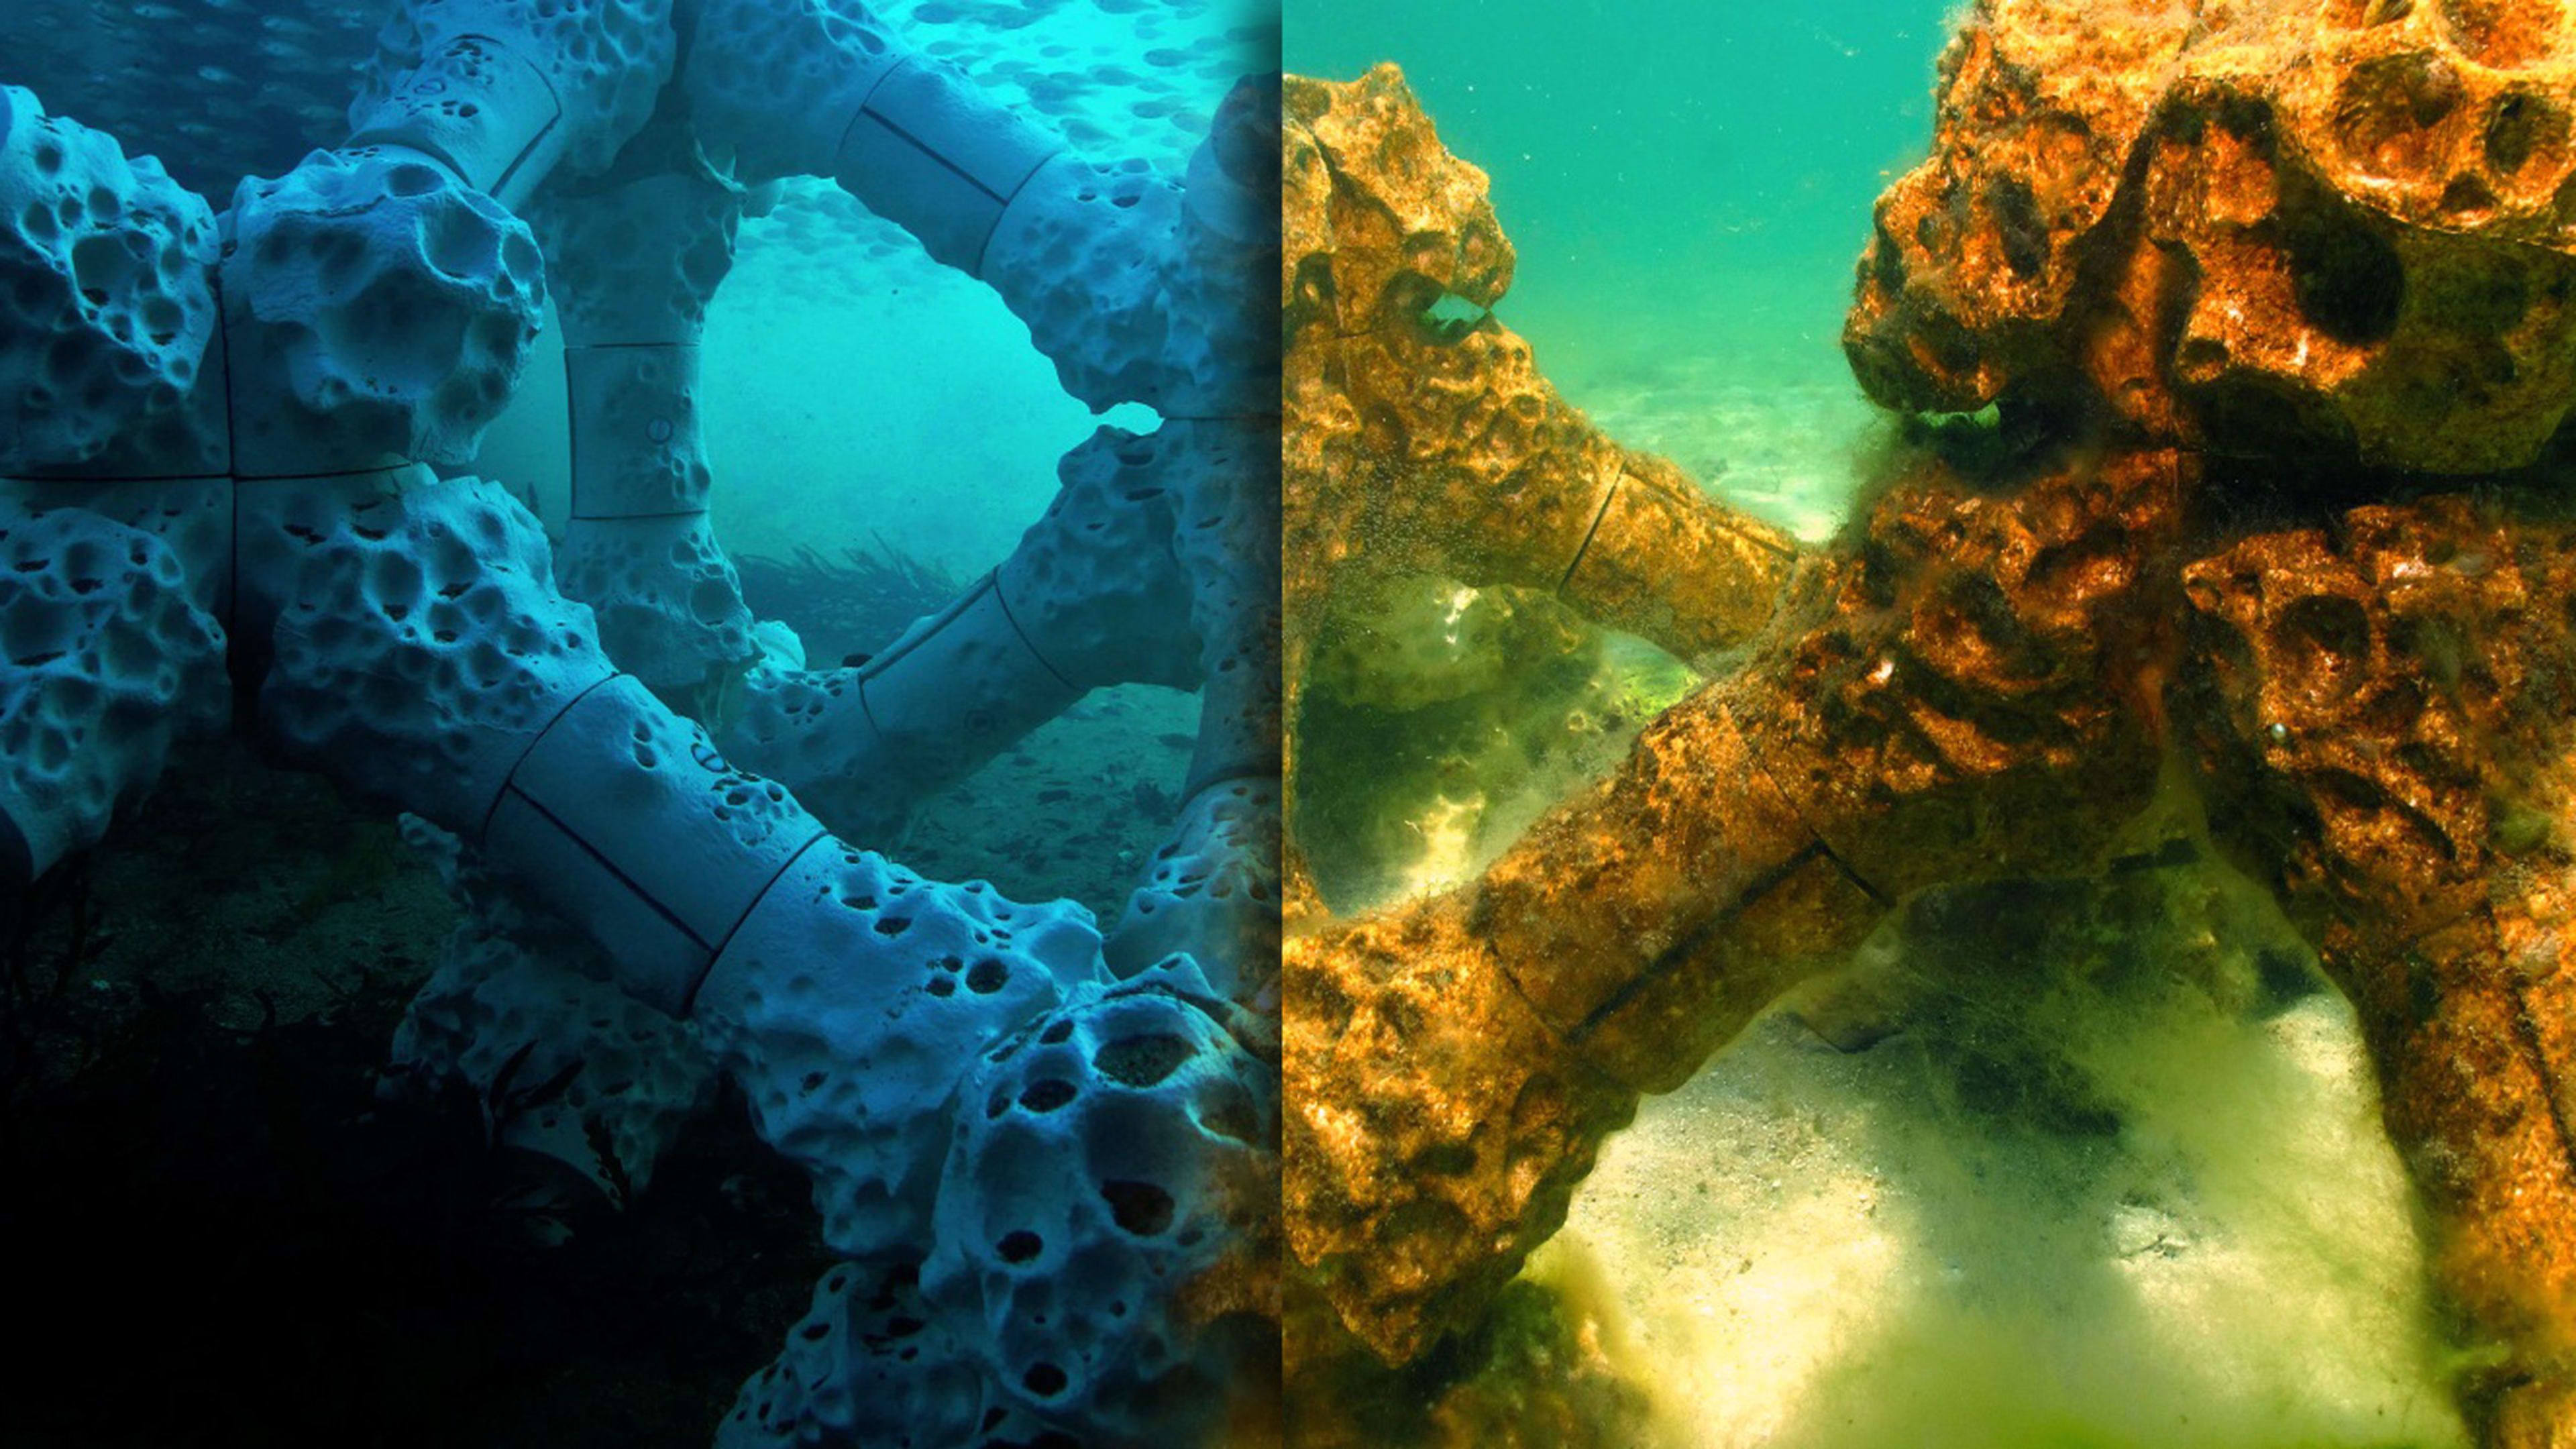 Our reefs are dying–what if we 3D print new ones?